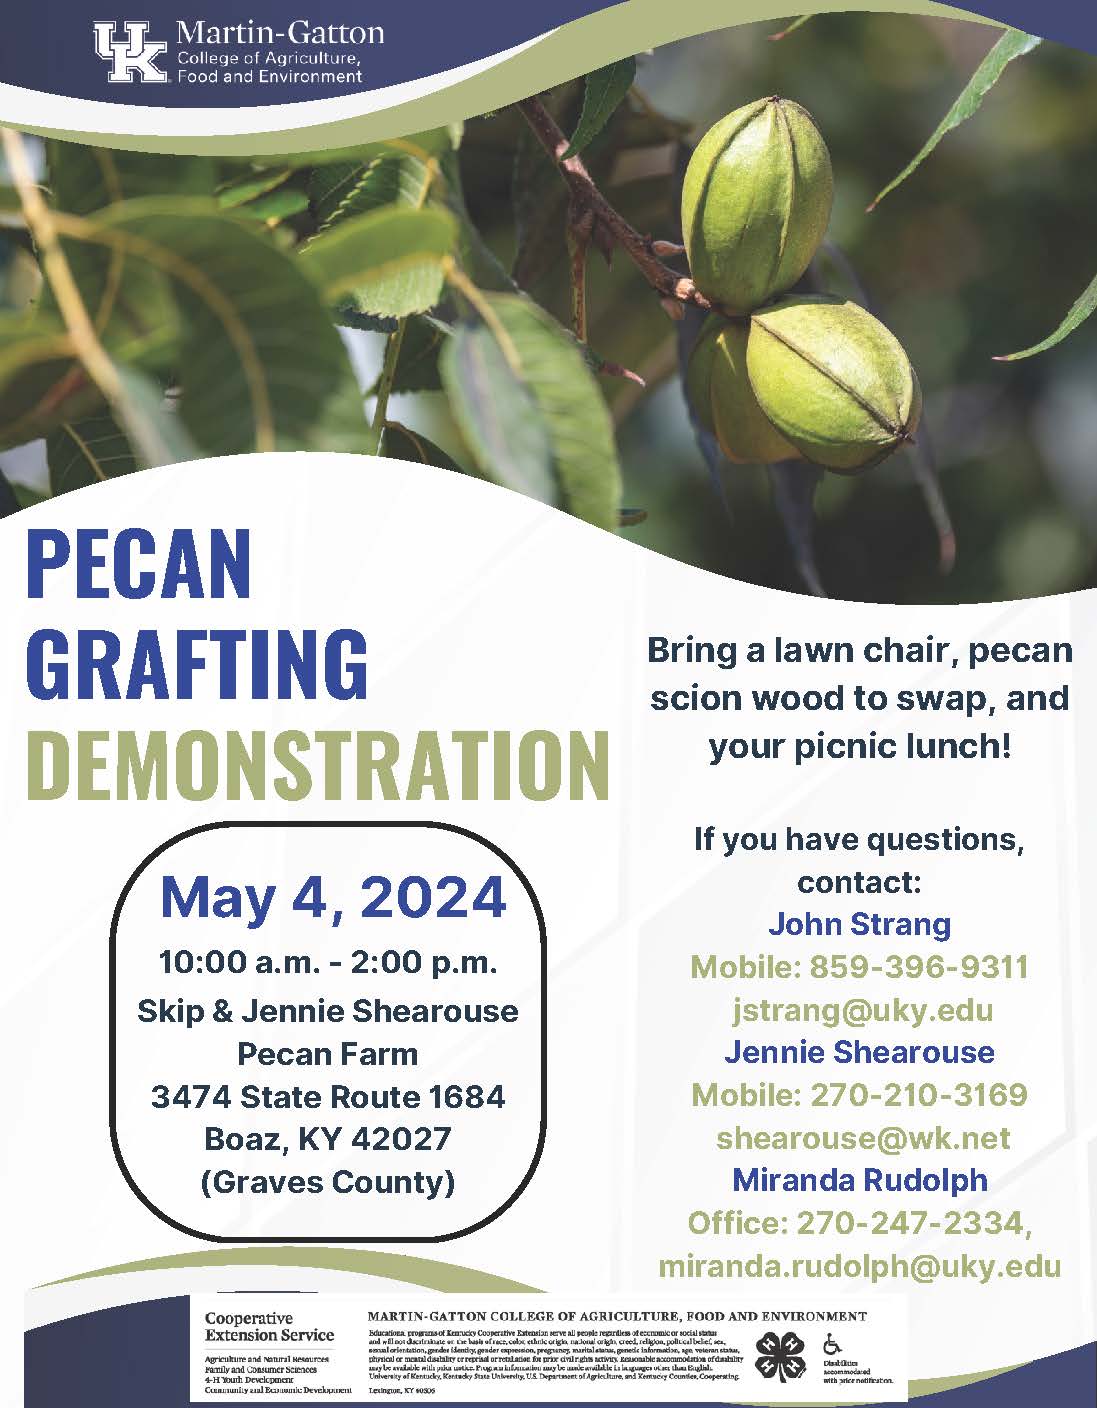 Pecan Grafting Demonstration May 4th, 2024 10:00AM to 2:00PM at Skip & Jennie Shearouse Pecan Farm